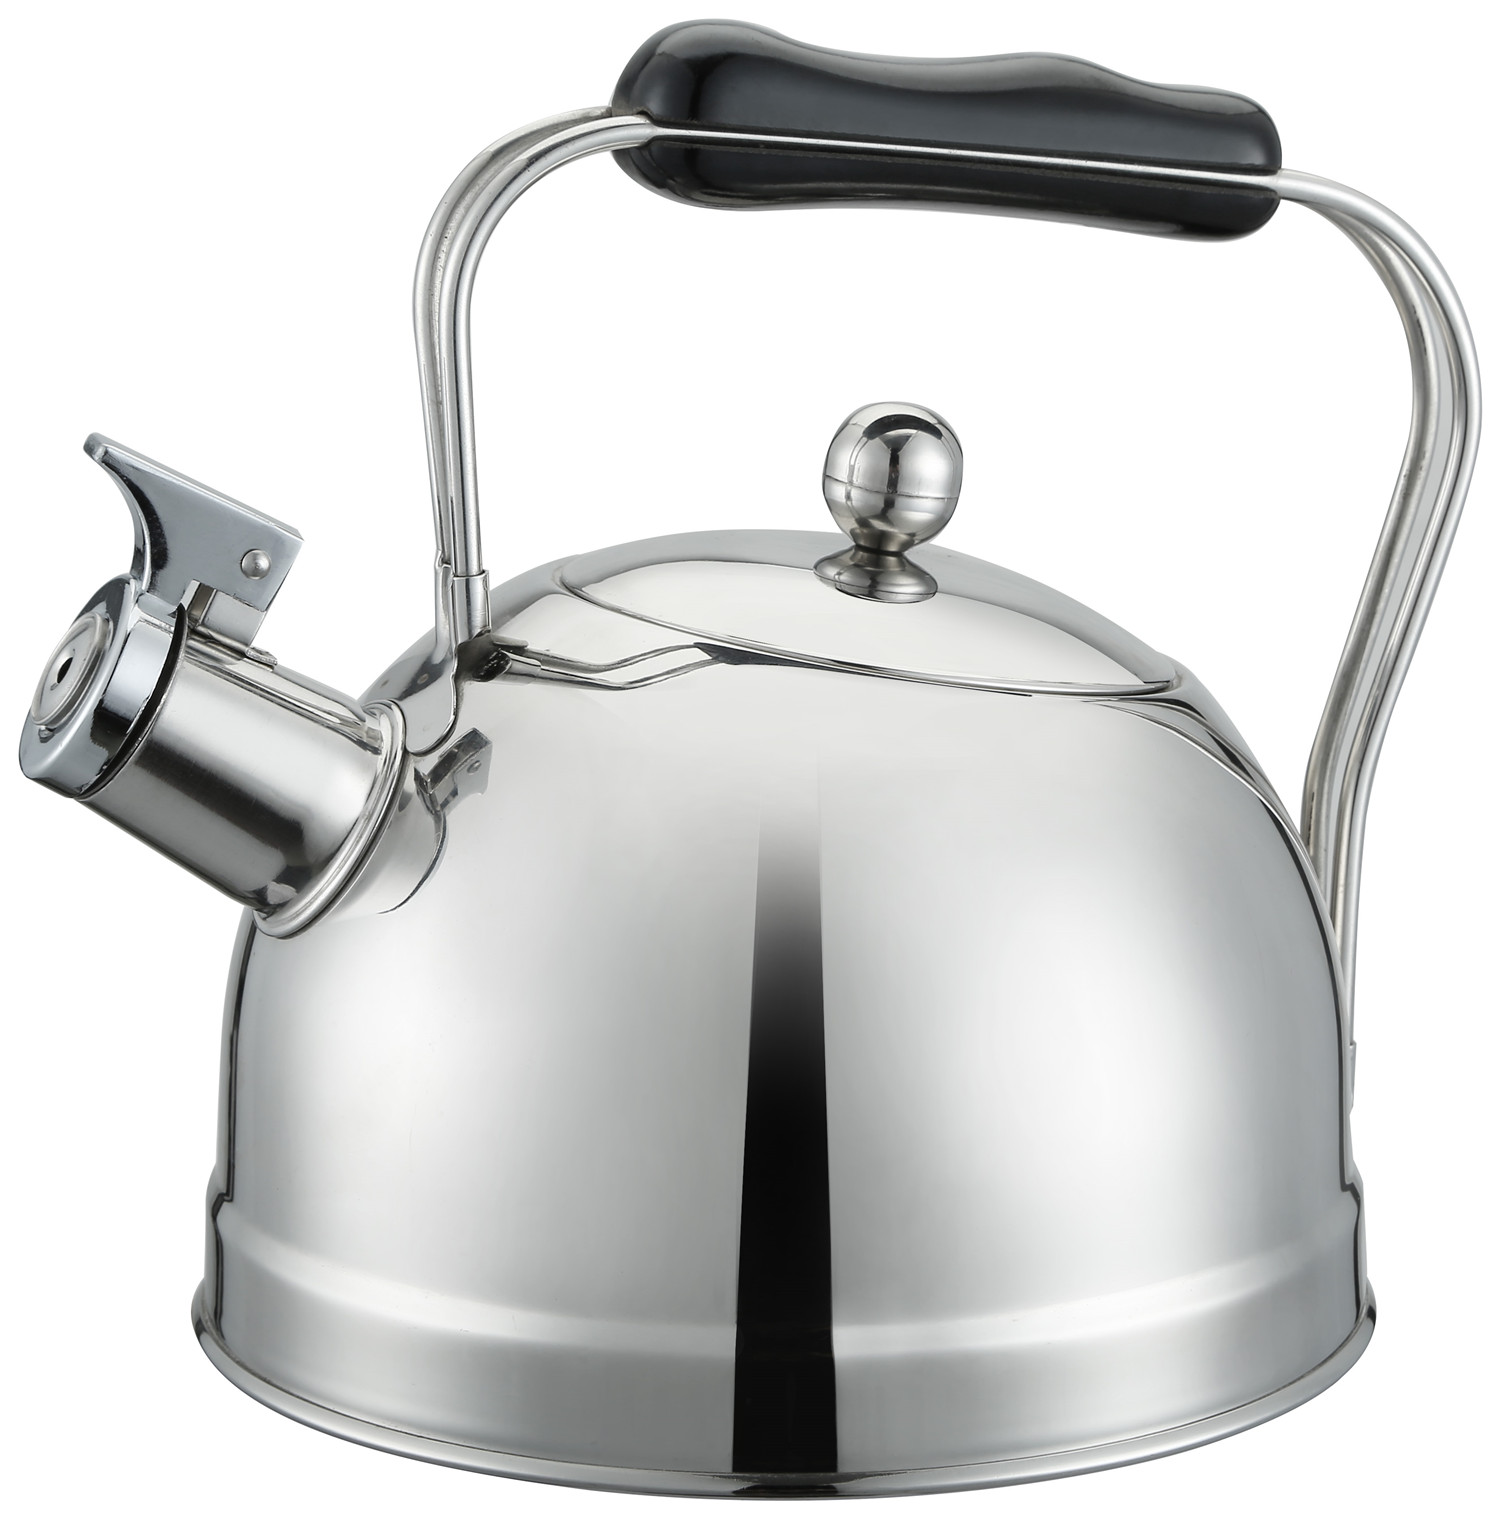 Stainless steel stove top whistling water kettle non electric